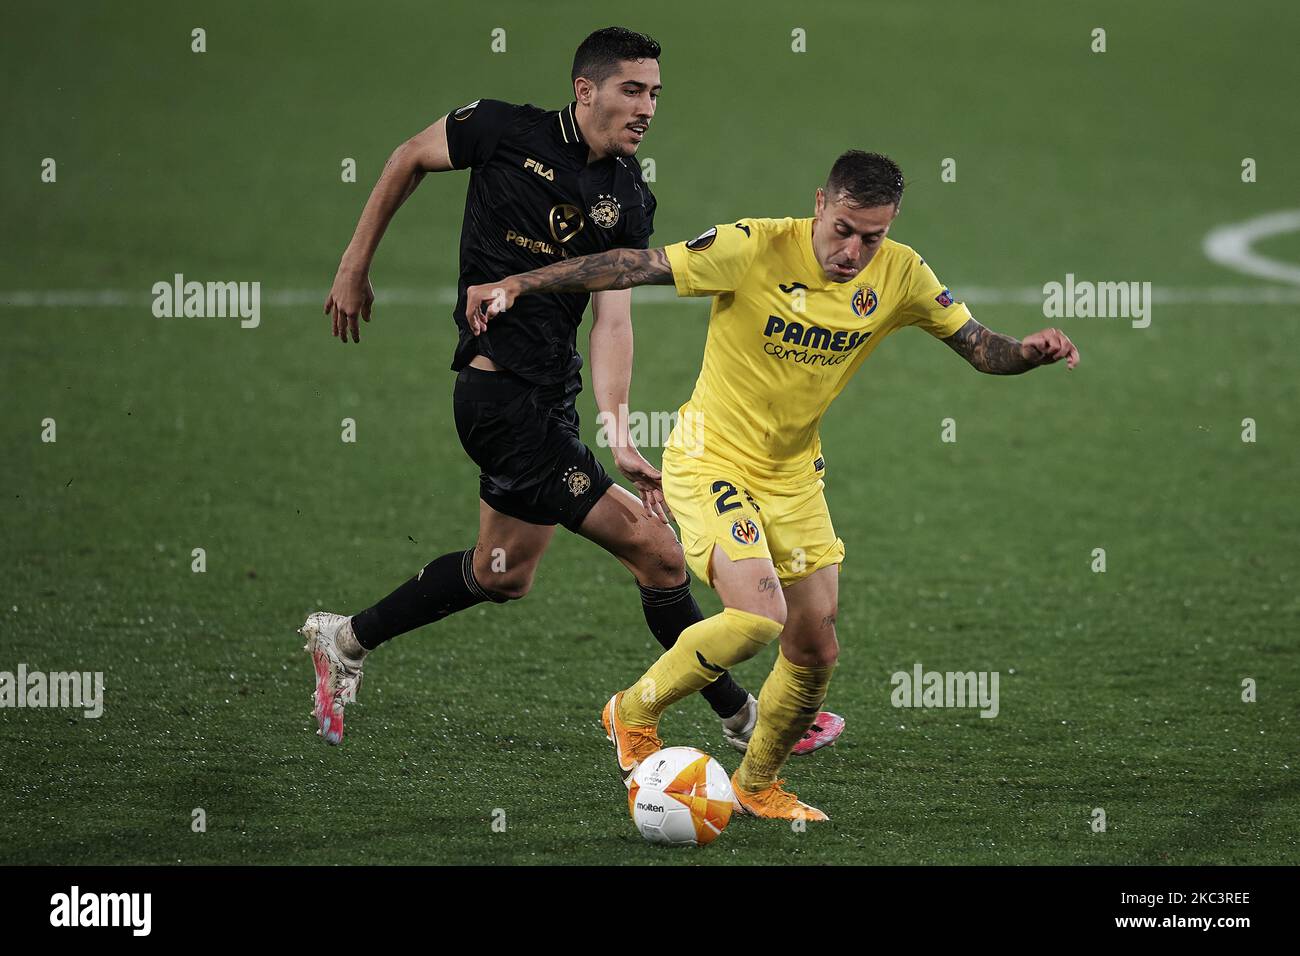 Ruben Pena of Villarreal and Matan Baltaxa of Maccabi Tel Aviv compete for the ball during the UEFA Europa League Group I stage match between Villarreal CF and Maccabi Tel-Aviv FC at Estadio de la Ceramica on November 5, 2020 in Villareal, Spain. (Photo by Jose Breton/Pics Action/NurPhoto) Stock Photo